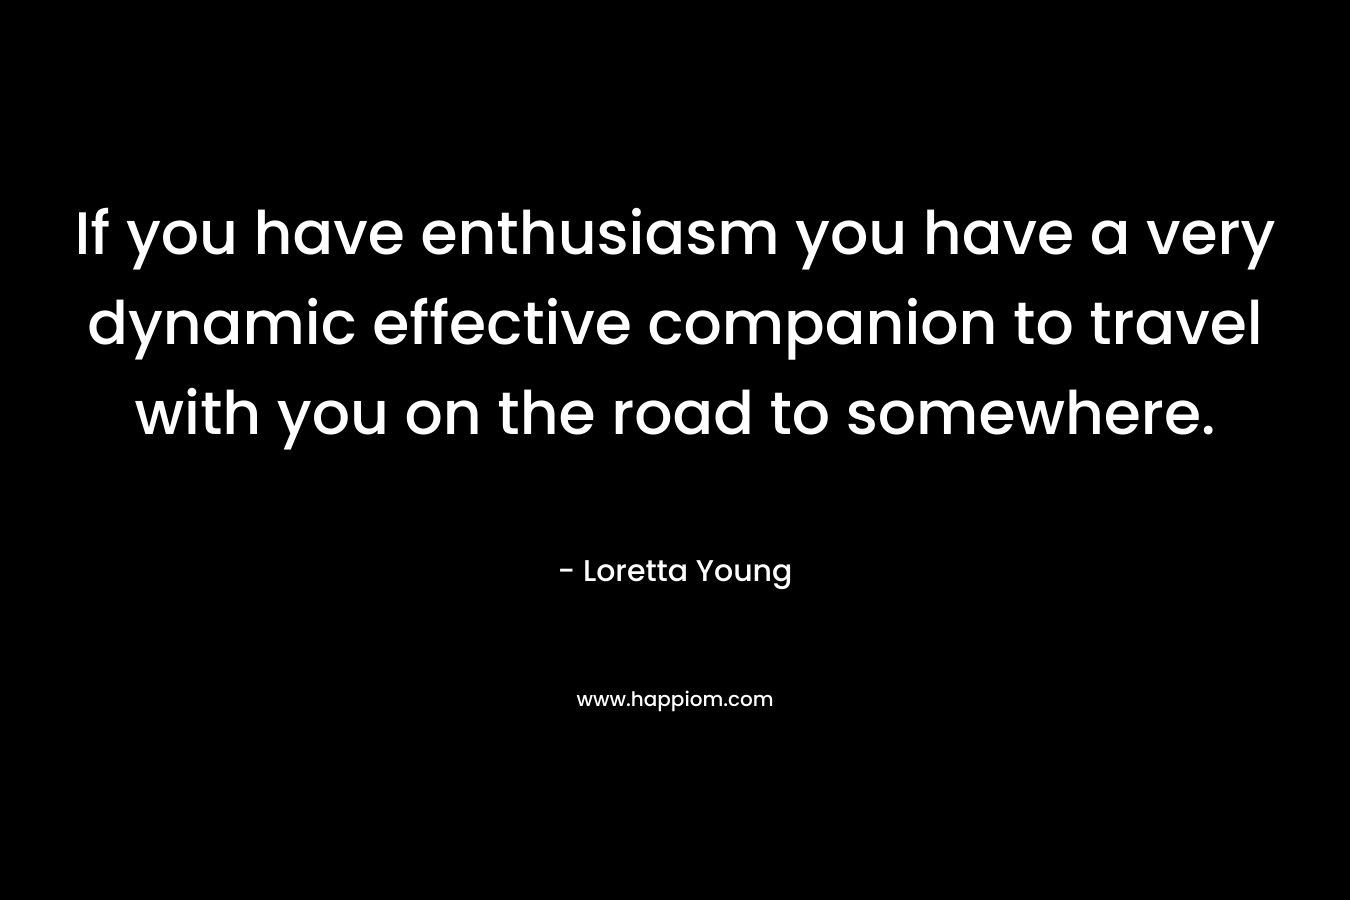 If you have enthusiasm you have a very dynamic effective companion to travel with you on the road to somewhere. – Loretta Young